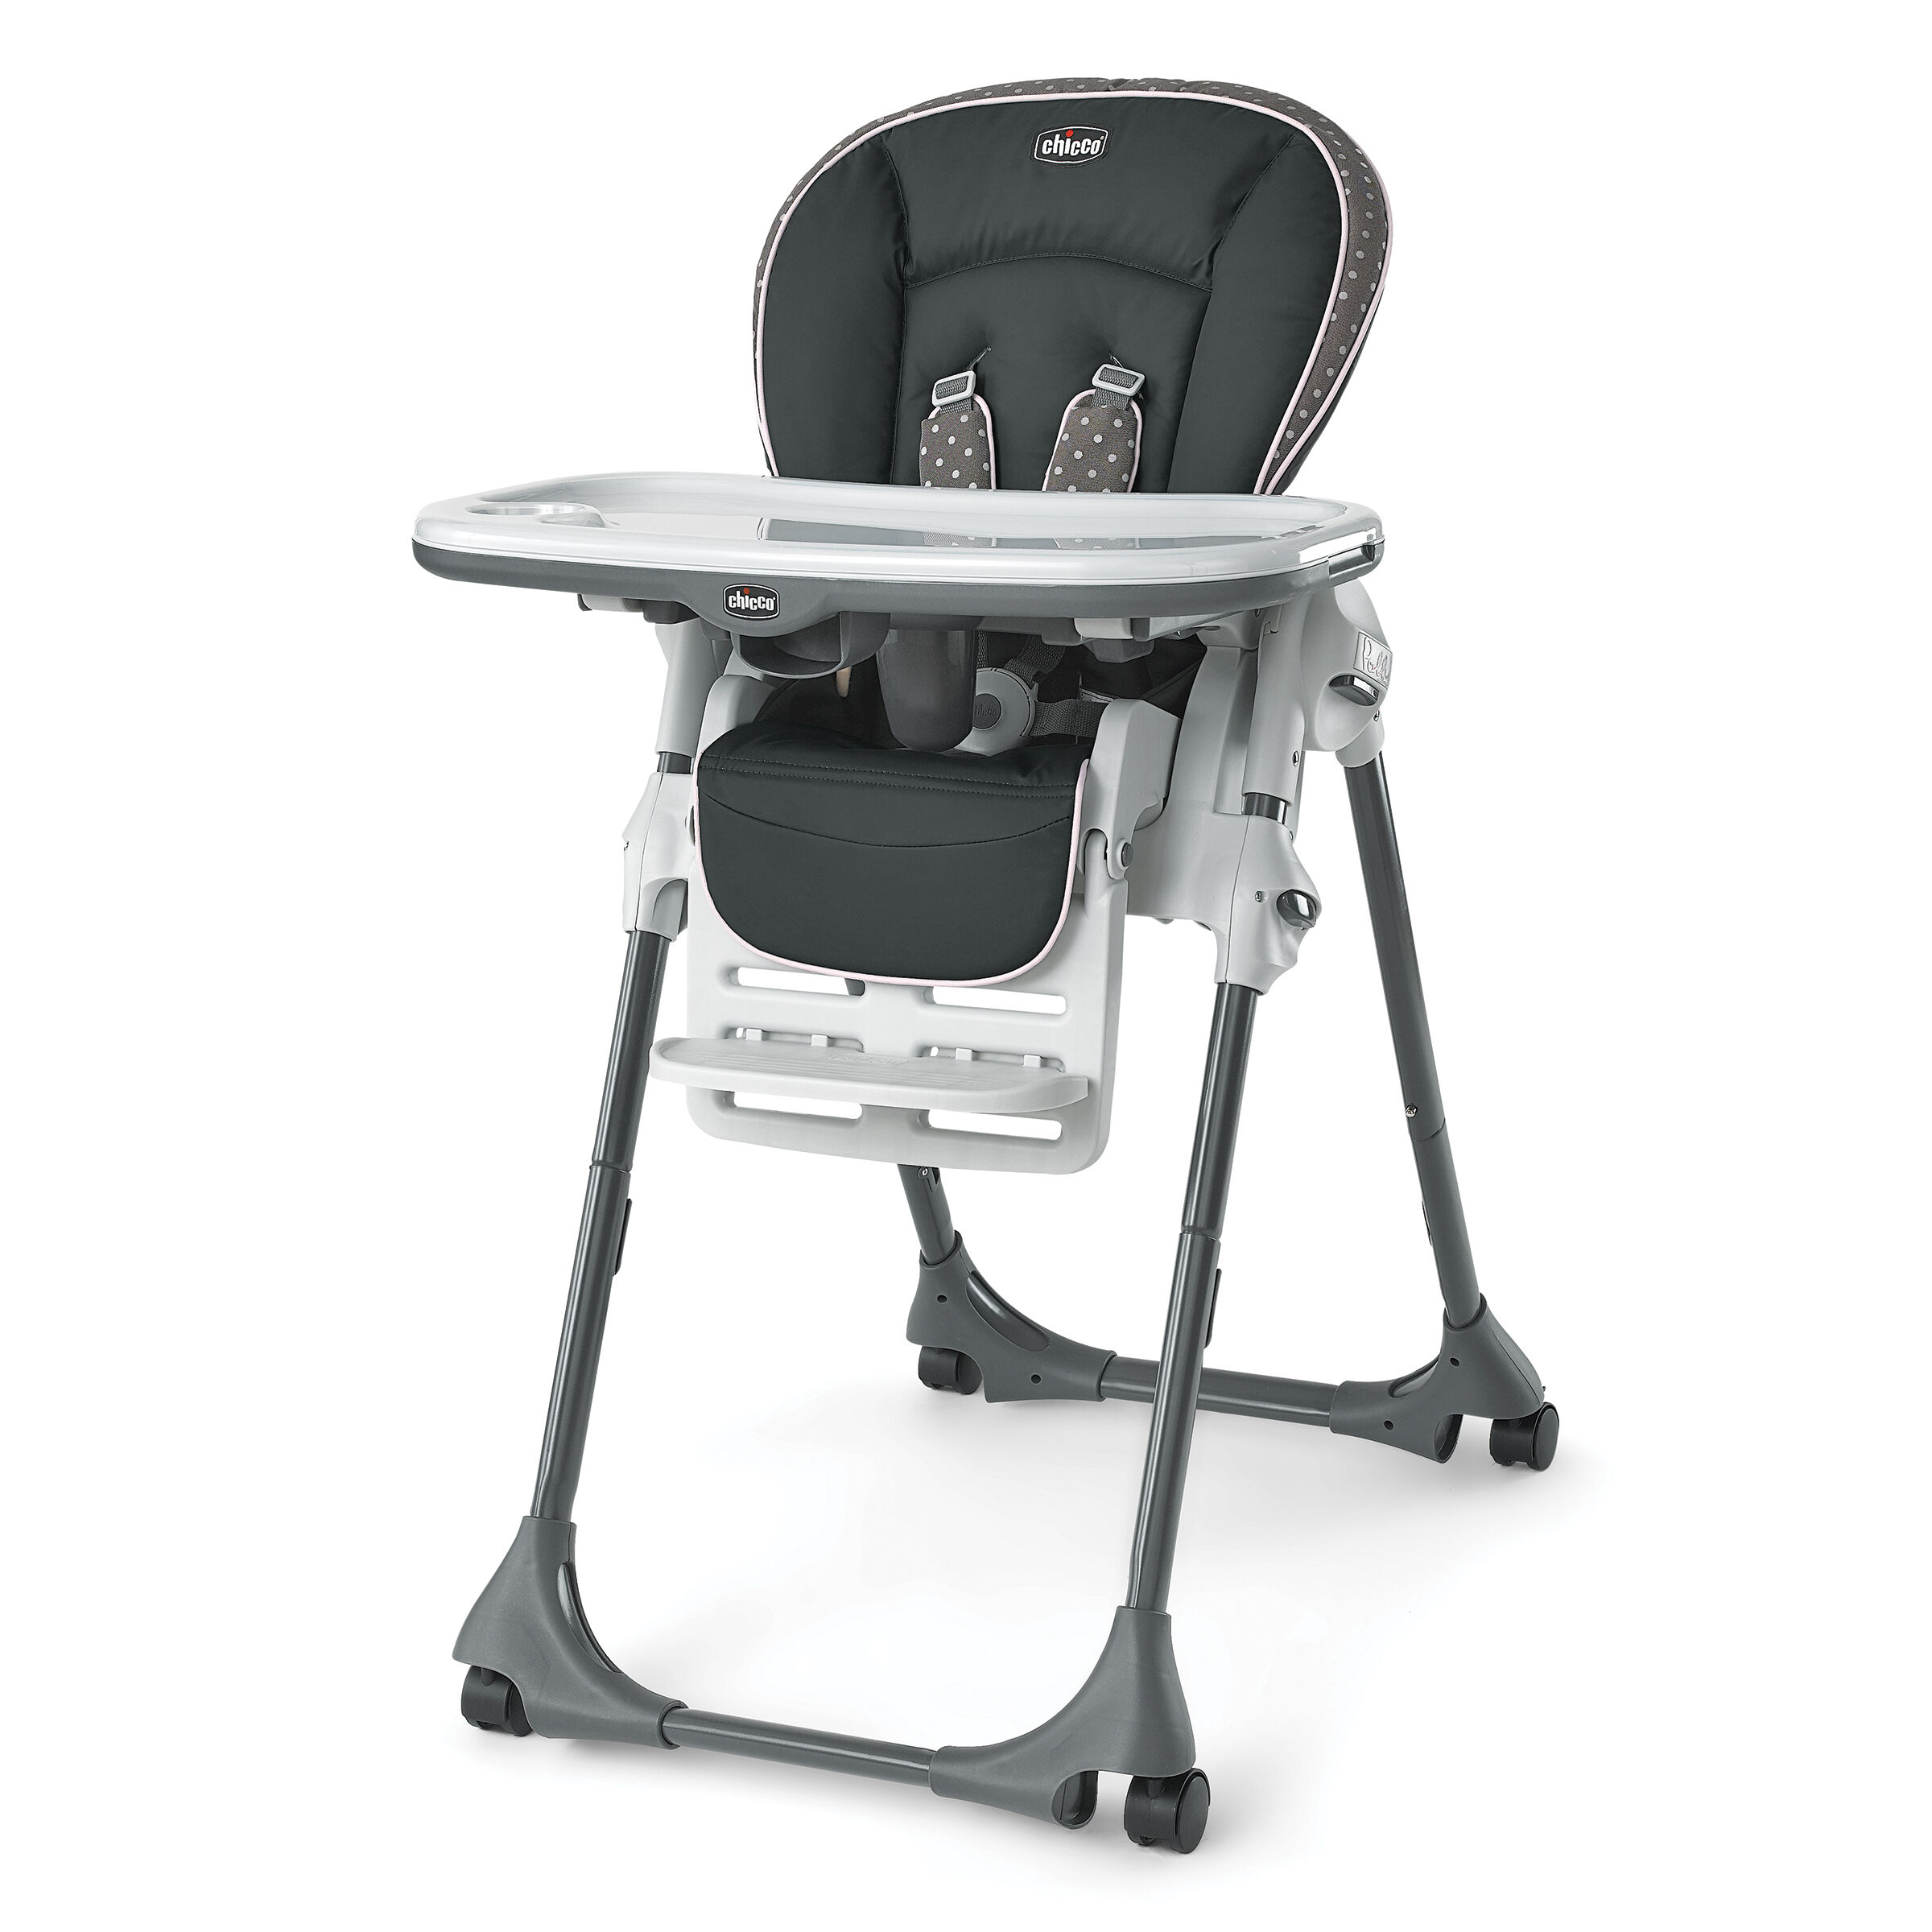 pink and grey high chair